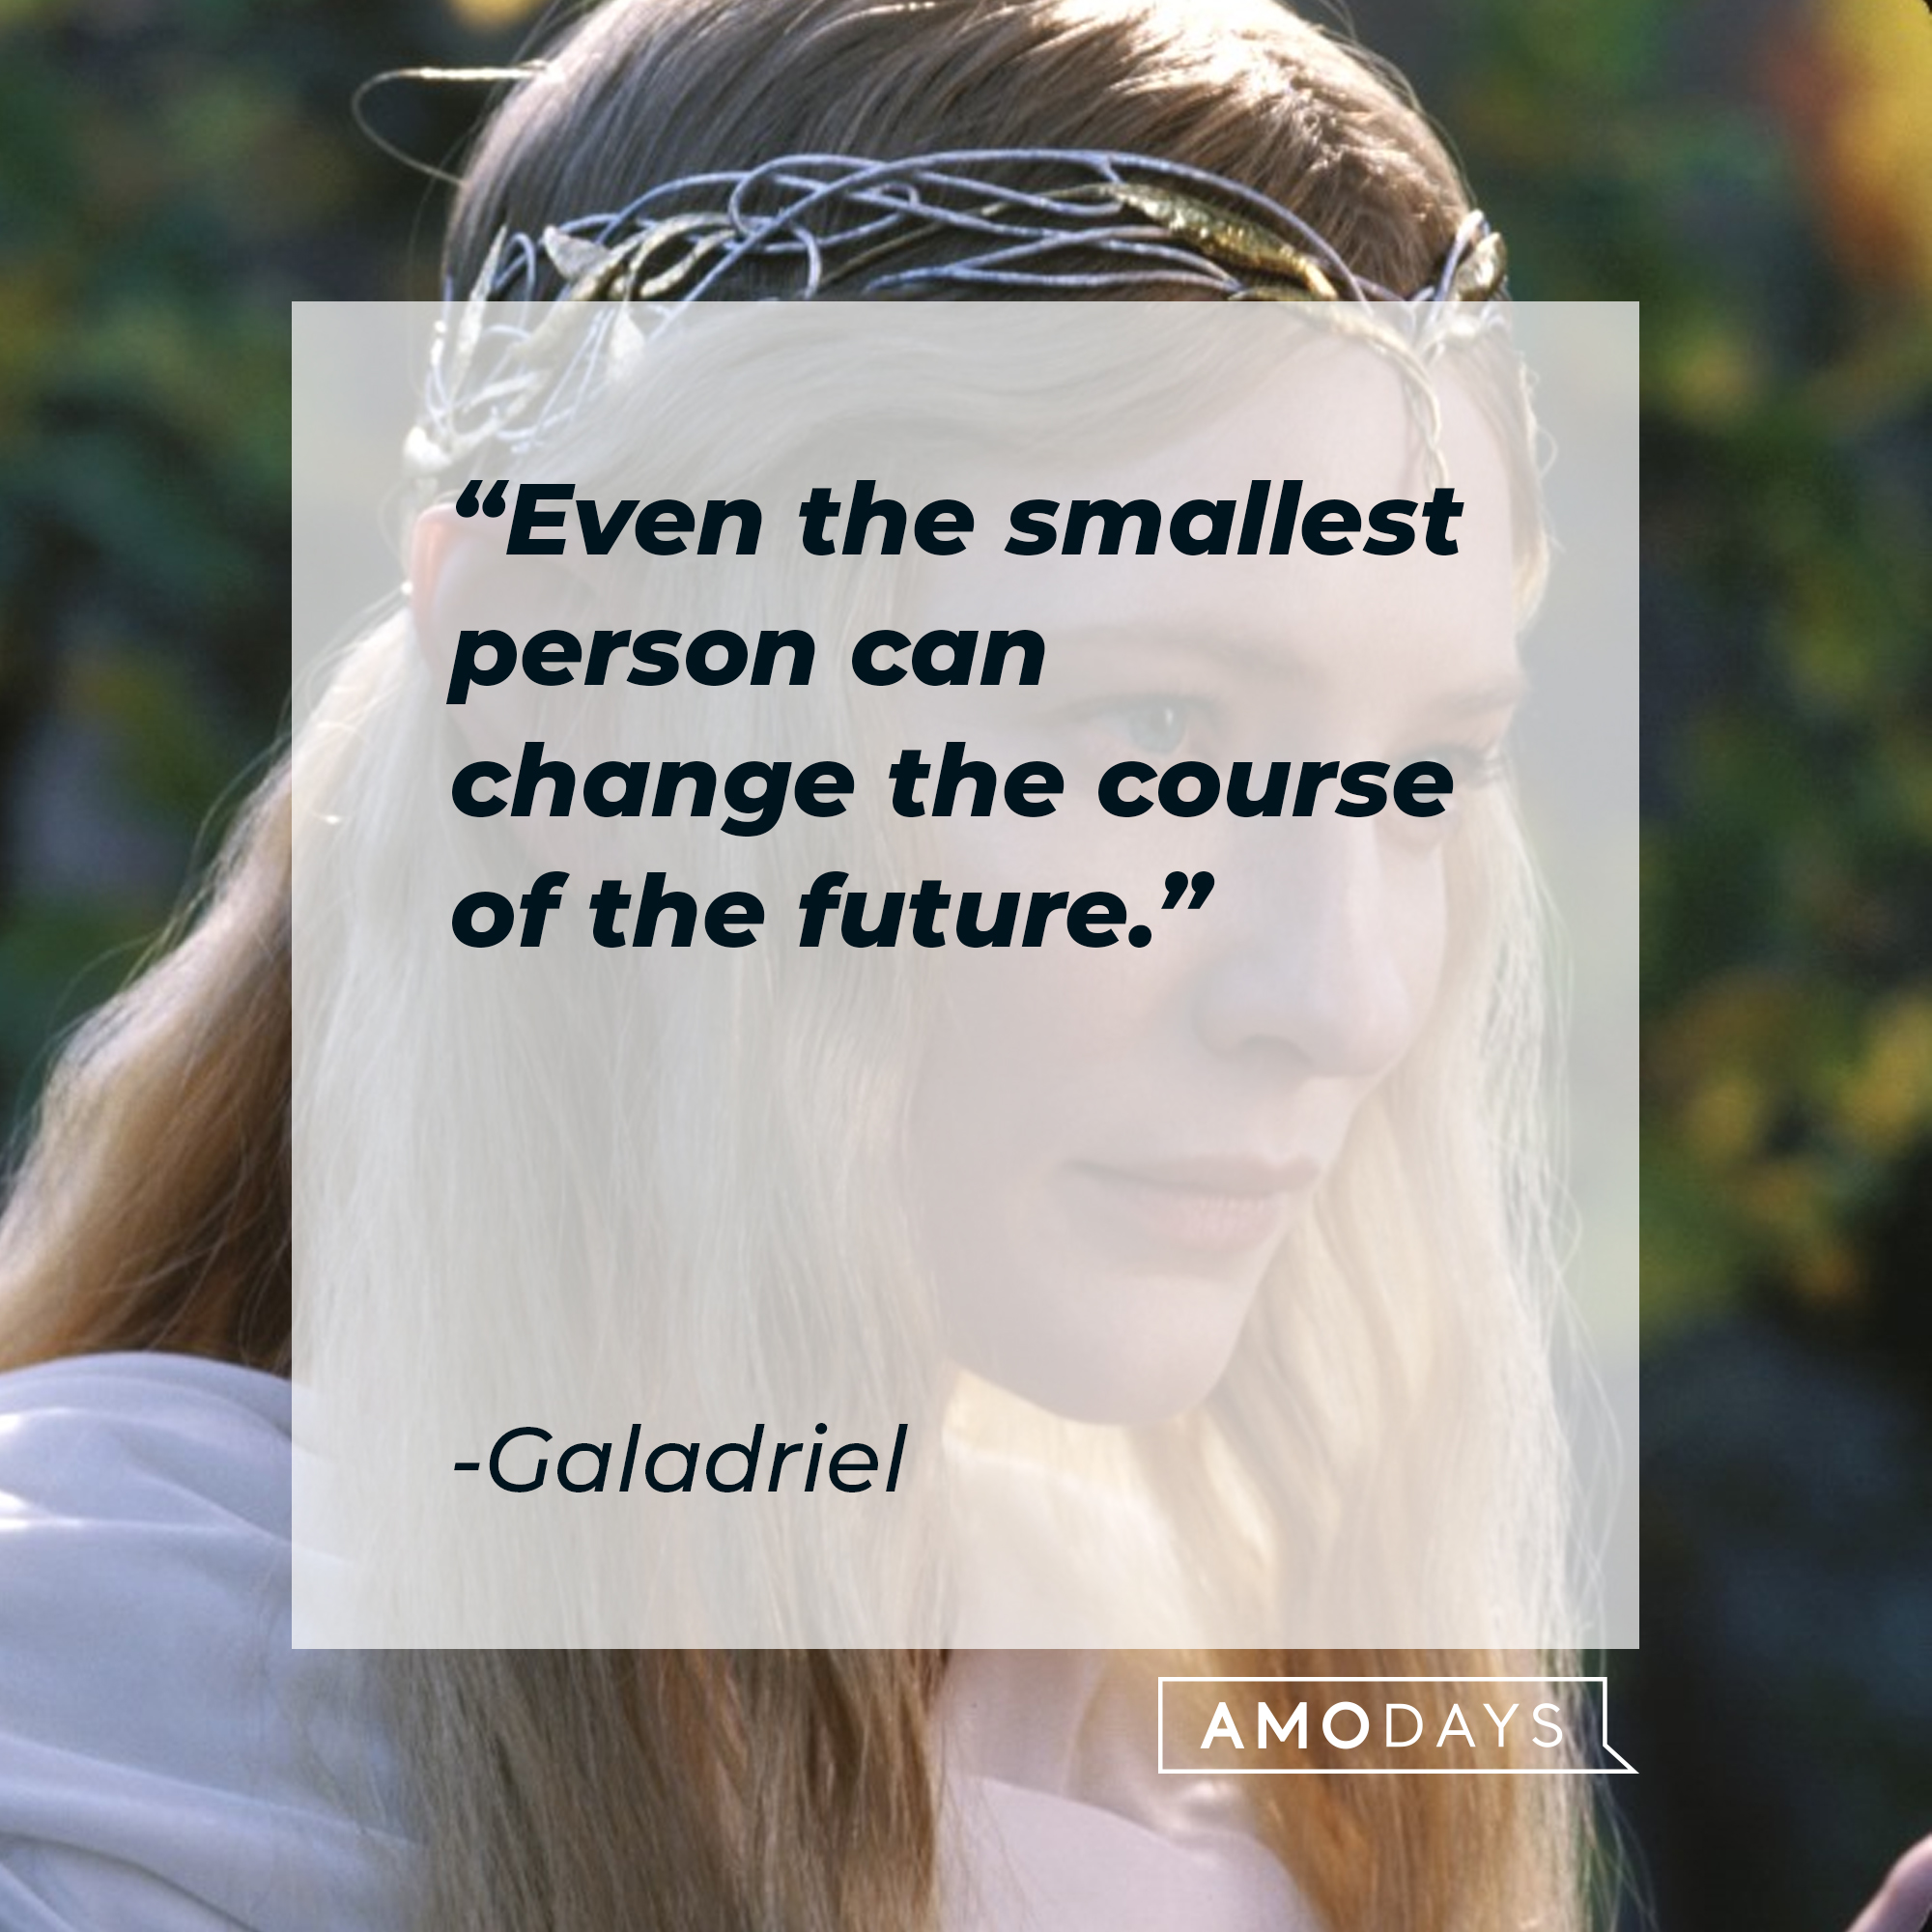 Galadriel with his quote from "The Lord of the Rings:" "Even the smallest person can change the course of the future." | Source: Facebook/lordoftheringstrilogy